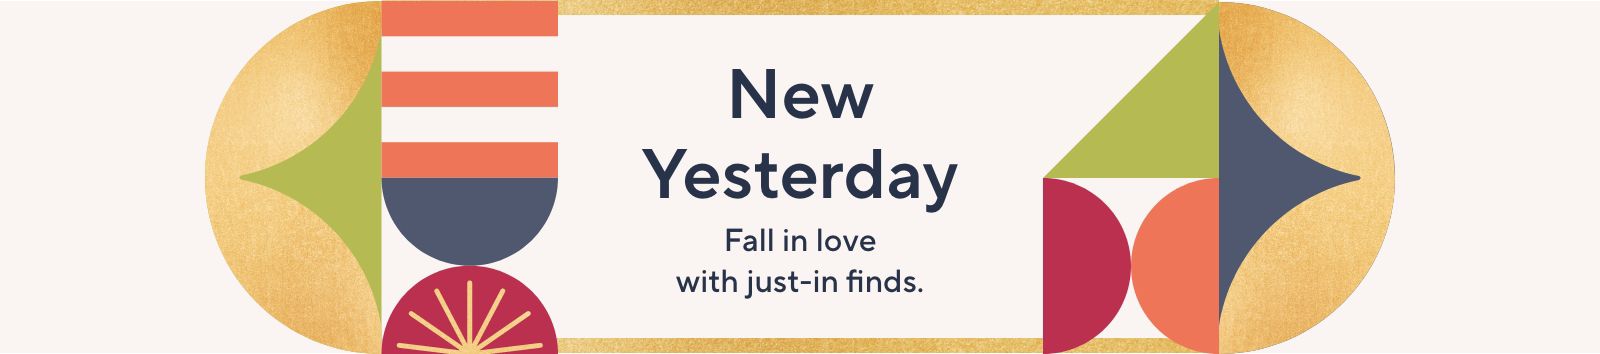 New Yesterday: Fall in love with just-in finds. 